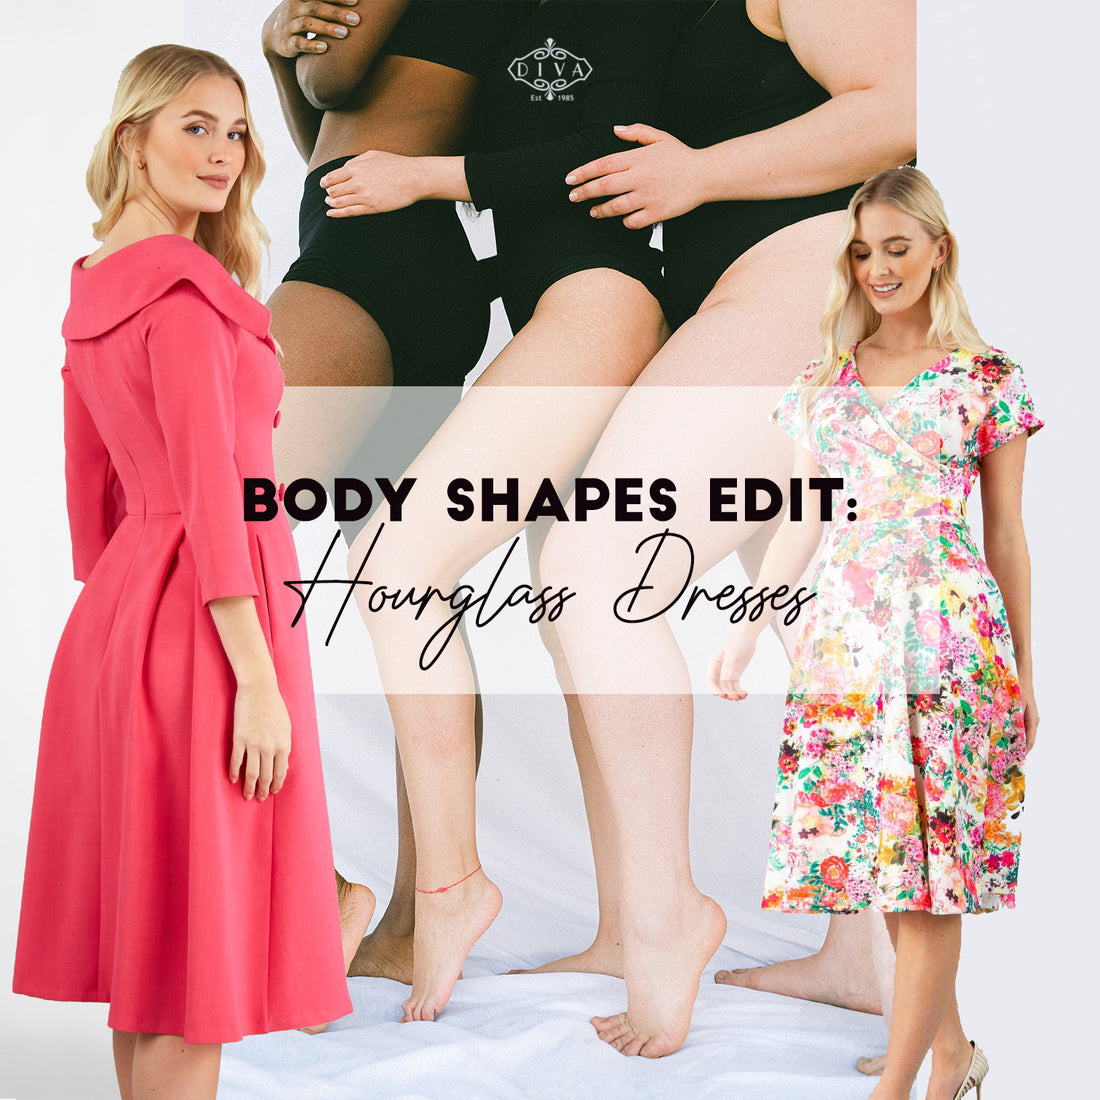 Amazing Hourglass Dresses for Your Shape: Body Shapes Edit